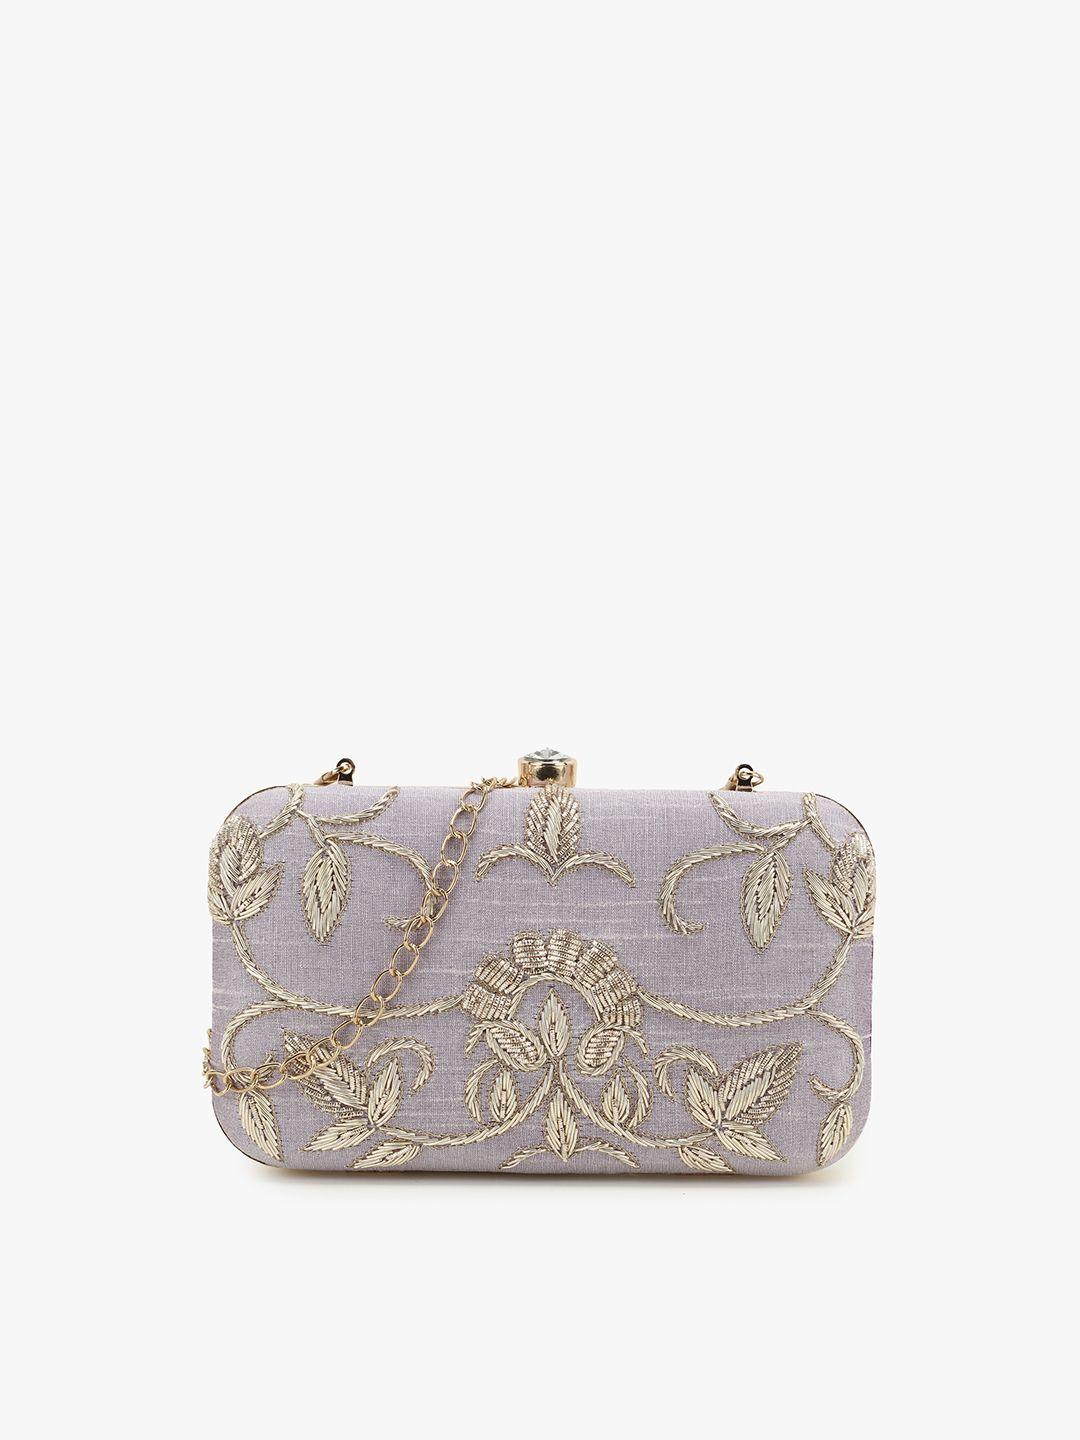 anekaant pastel purple & gold-toned embellished box clutch